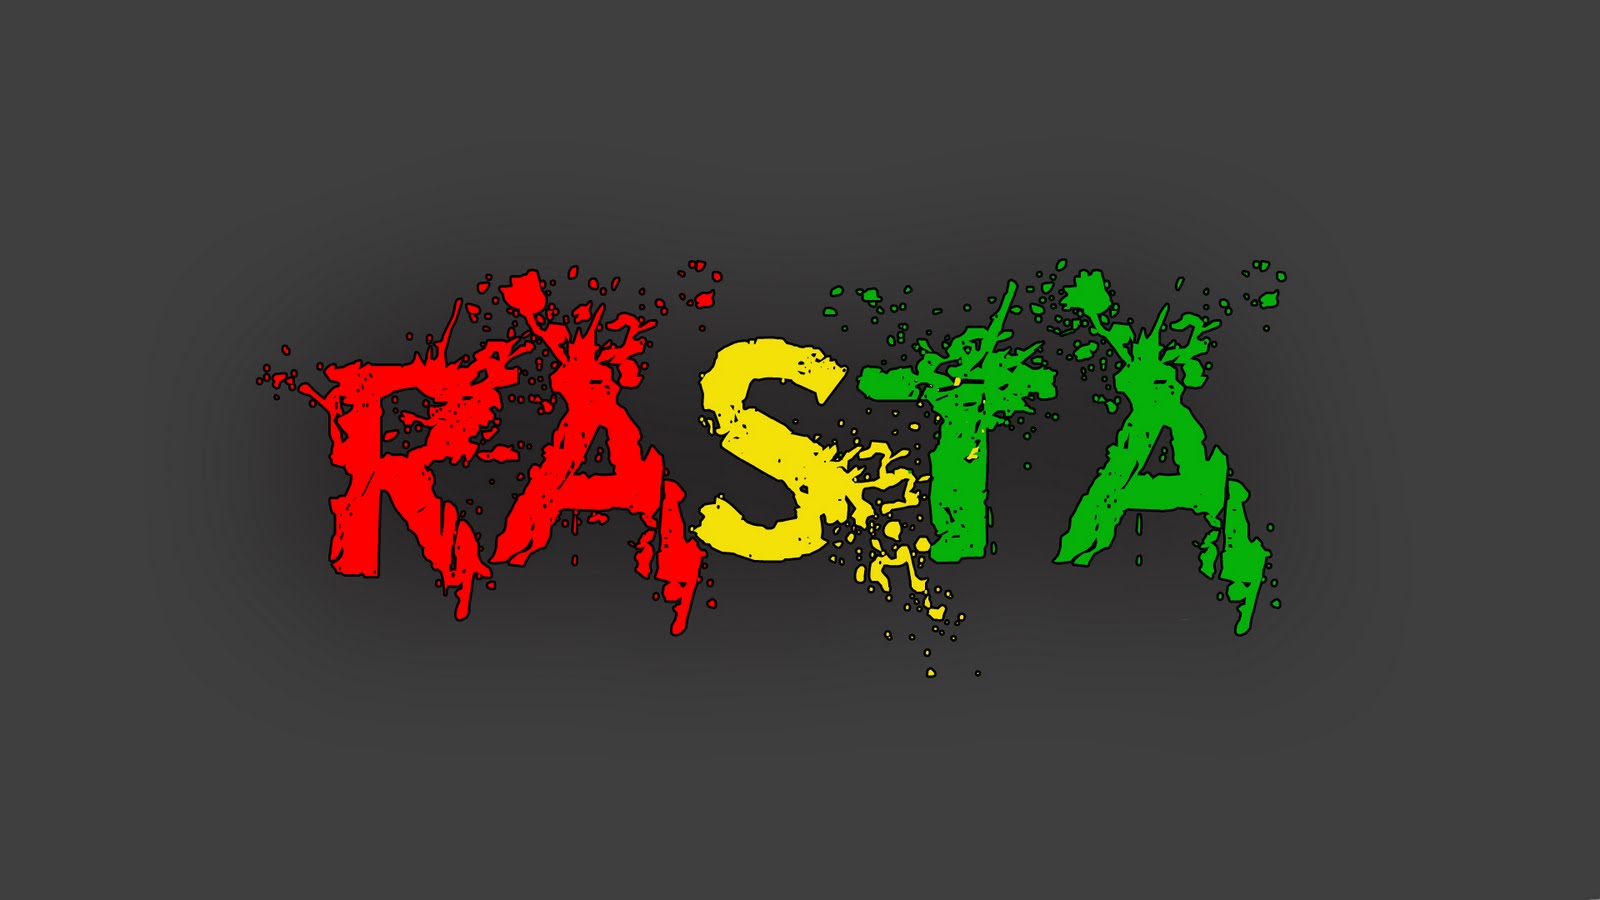 Rasta Weed Live Wallpaper Android Apps on Google Play 1600x900